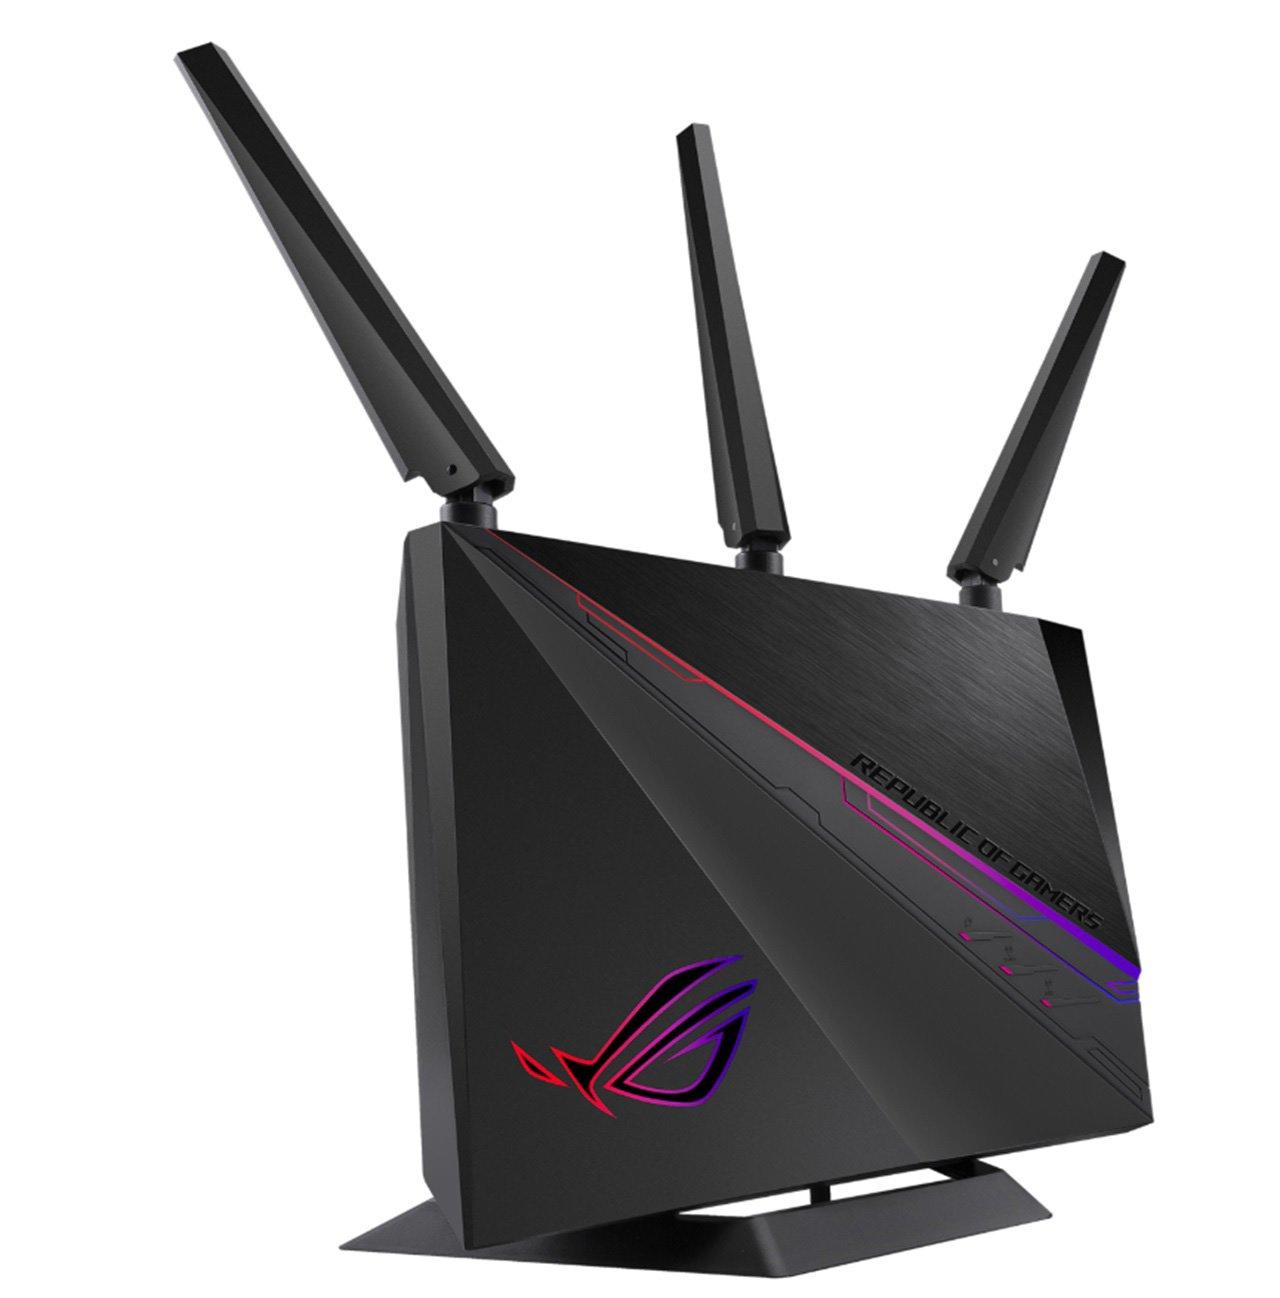 Ac2900 Rog Rapture Gaming Router With Nvidia Geforce Now Pc Gamestop